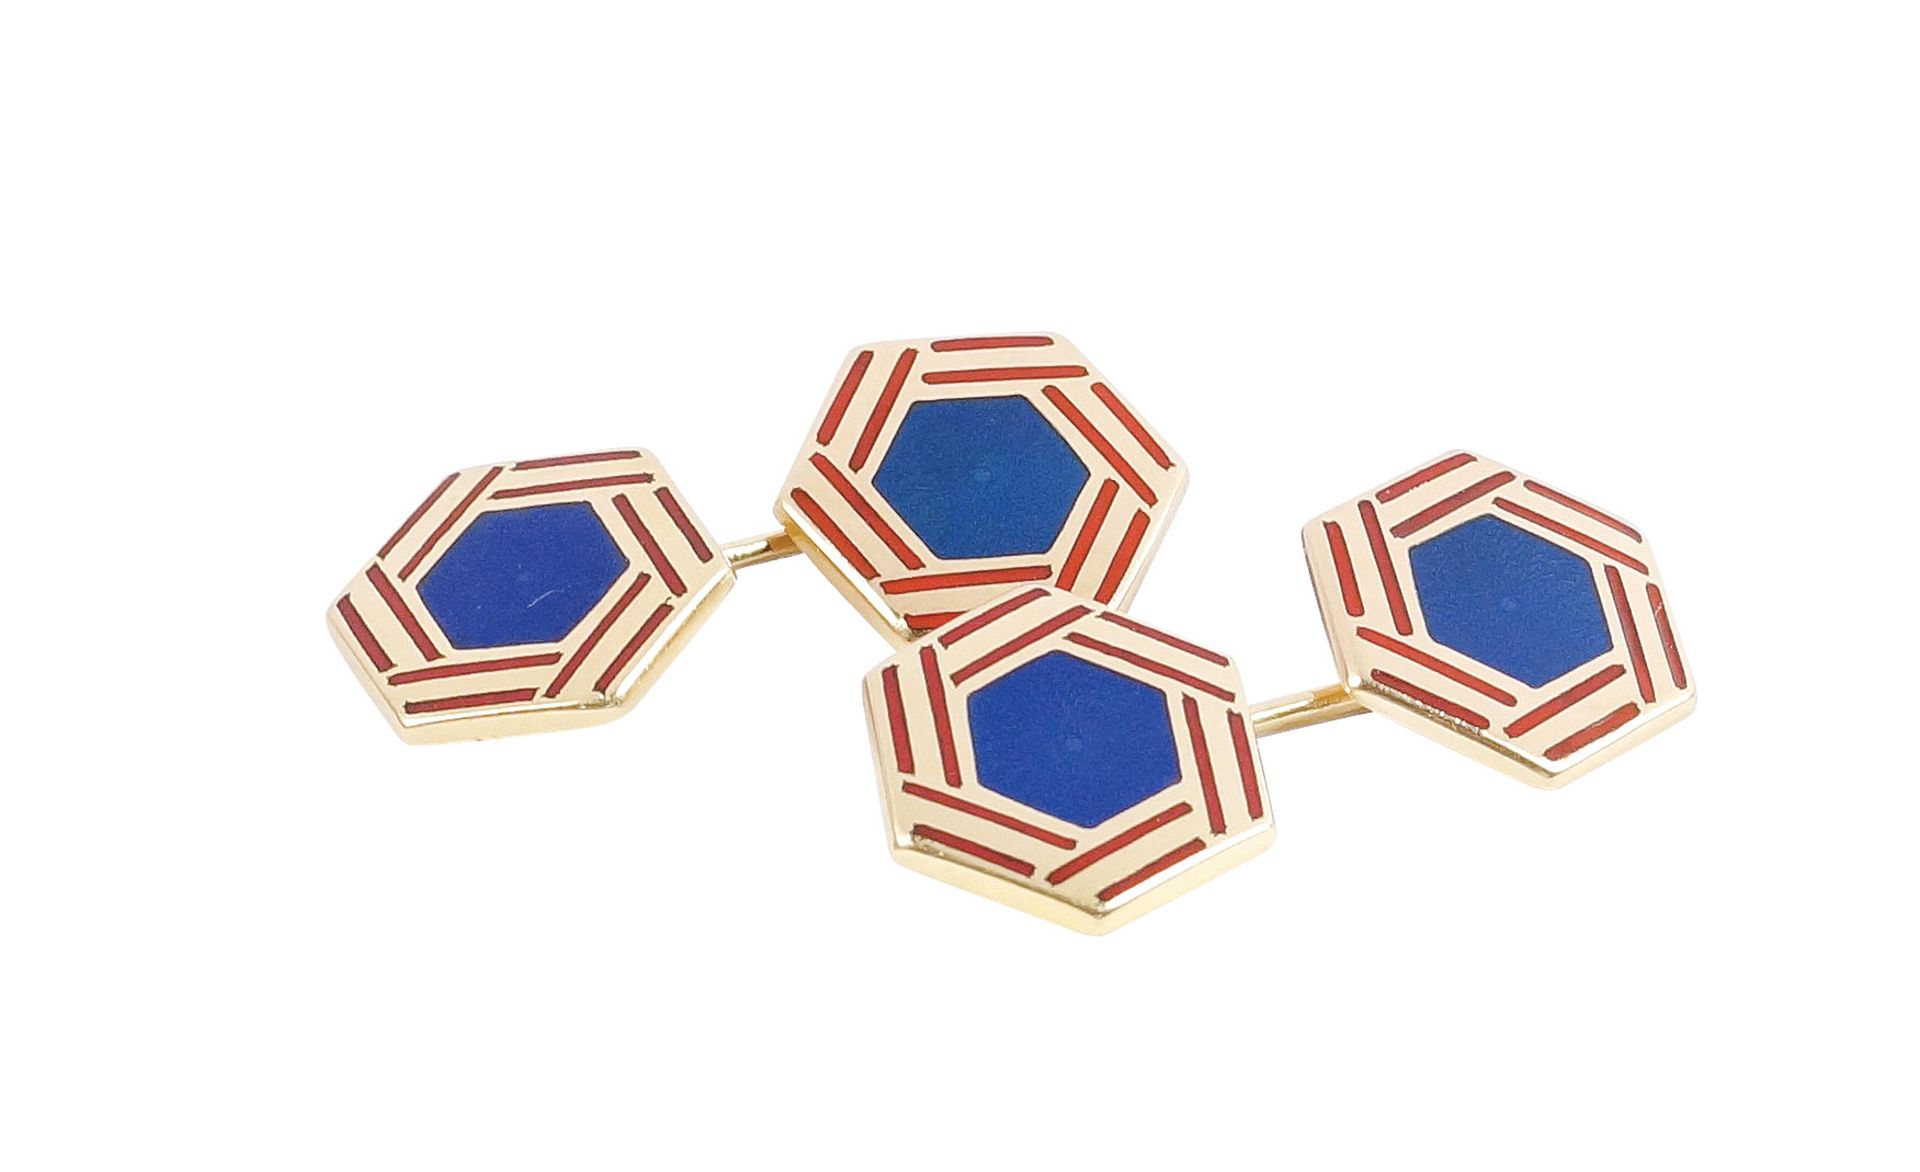 An 18k gold and enamel pair of cuff-links